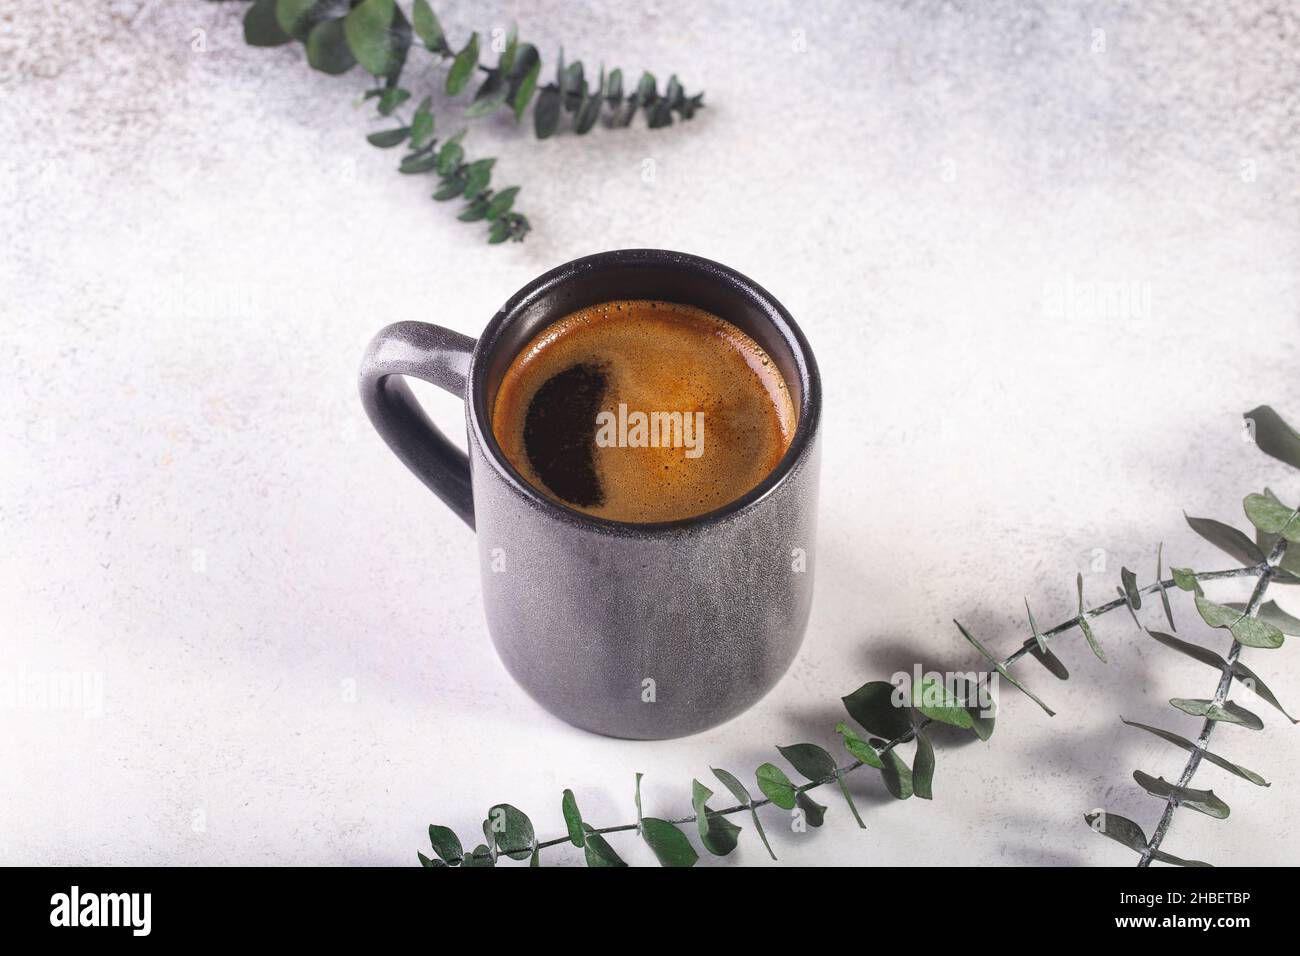 cup of coffee on grey table eucalyptus leaves Stock Photo